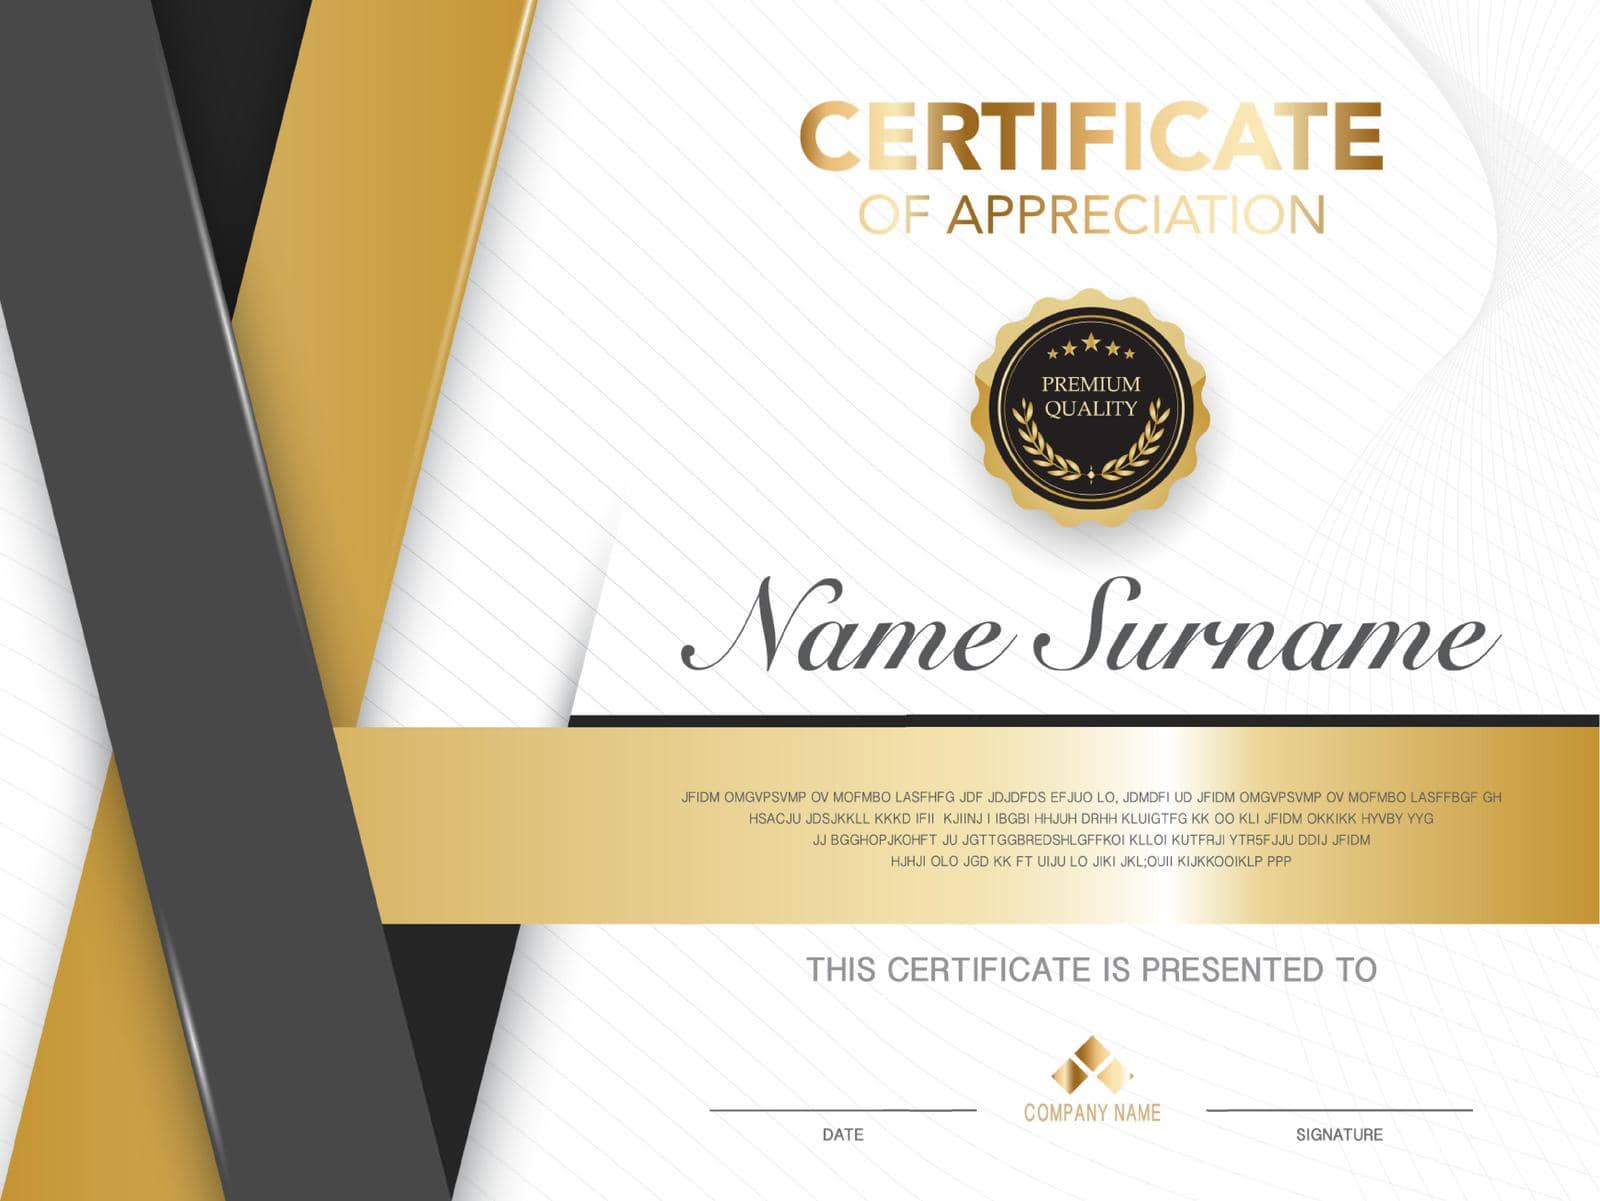 diploma certificate template black and gold color with luxury and modern style vector image, suitable for appreciation.  Vector illustration. by jatmikaV